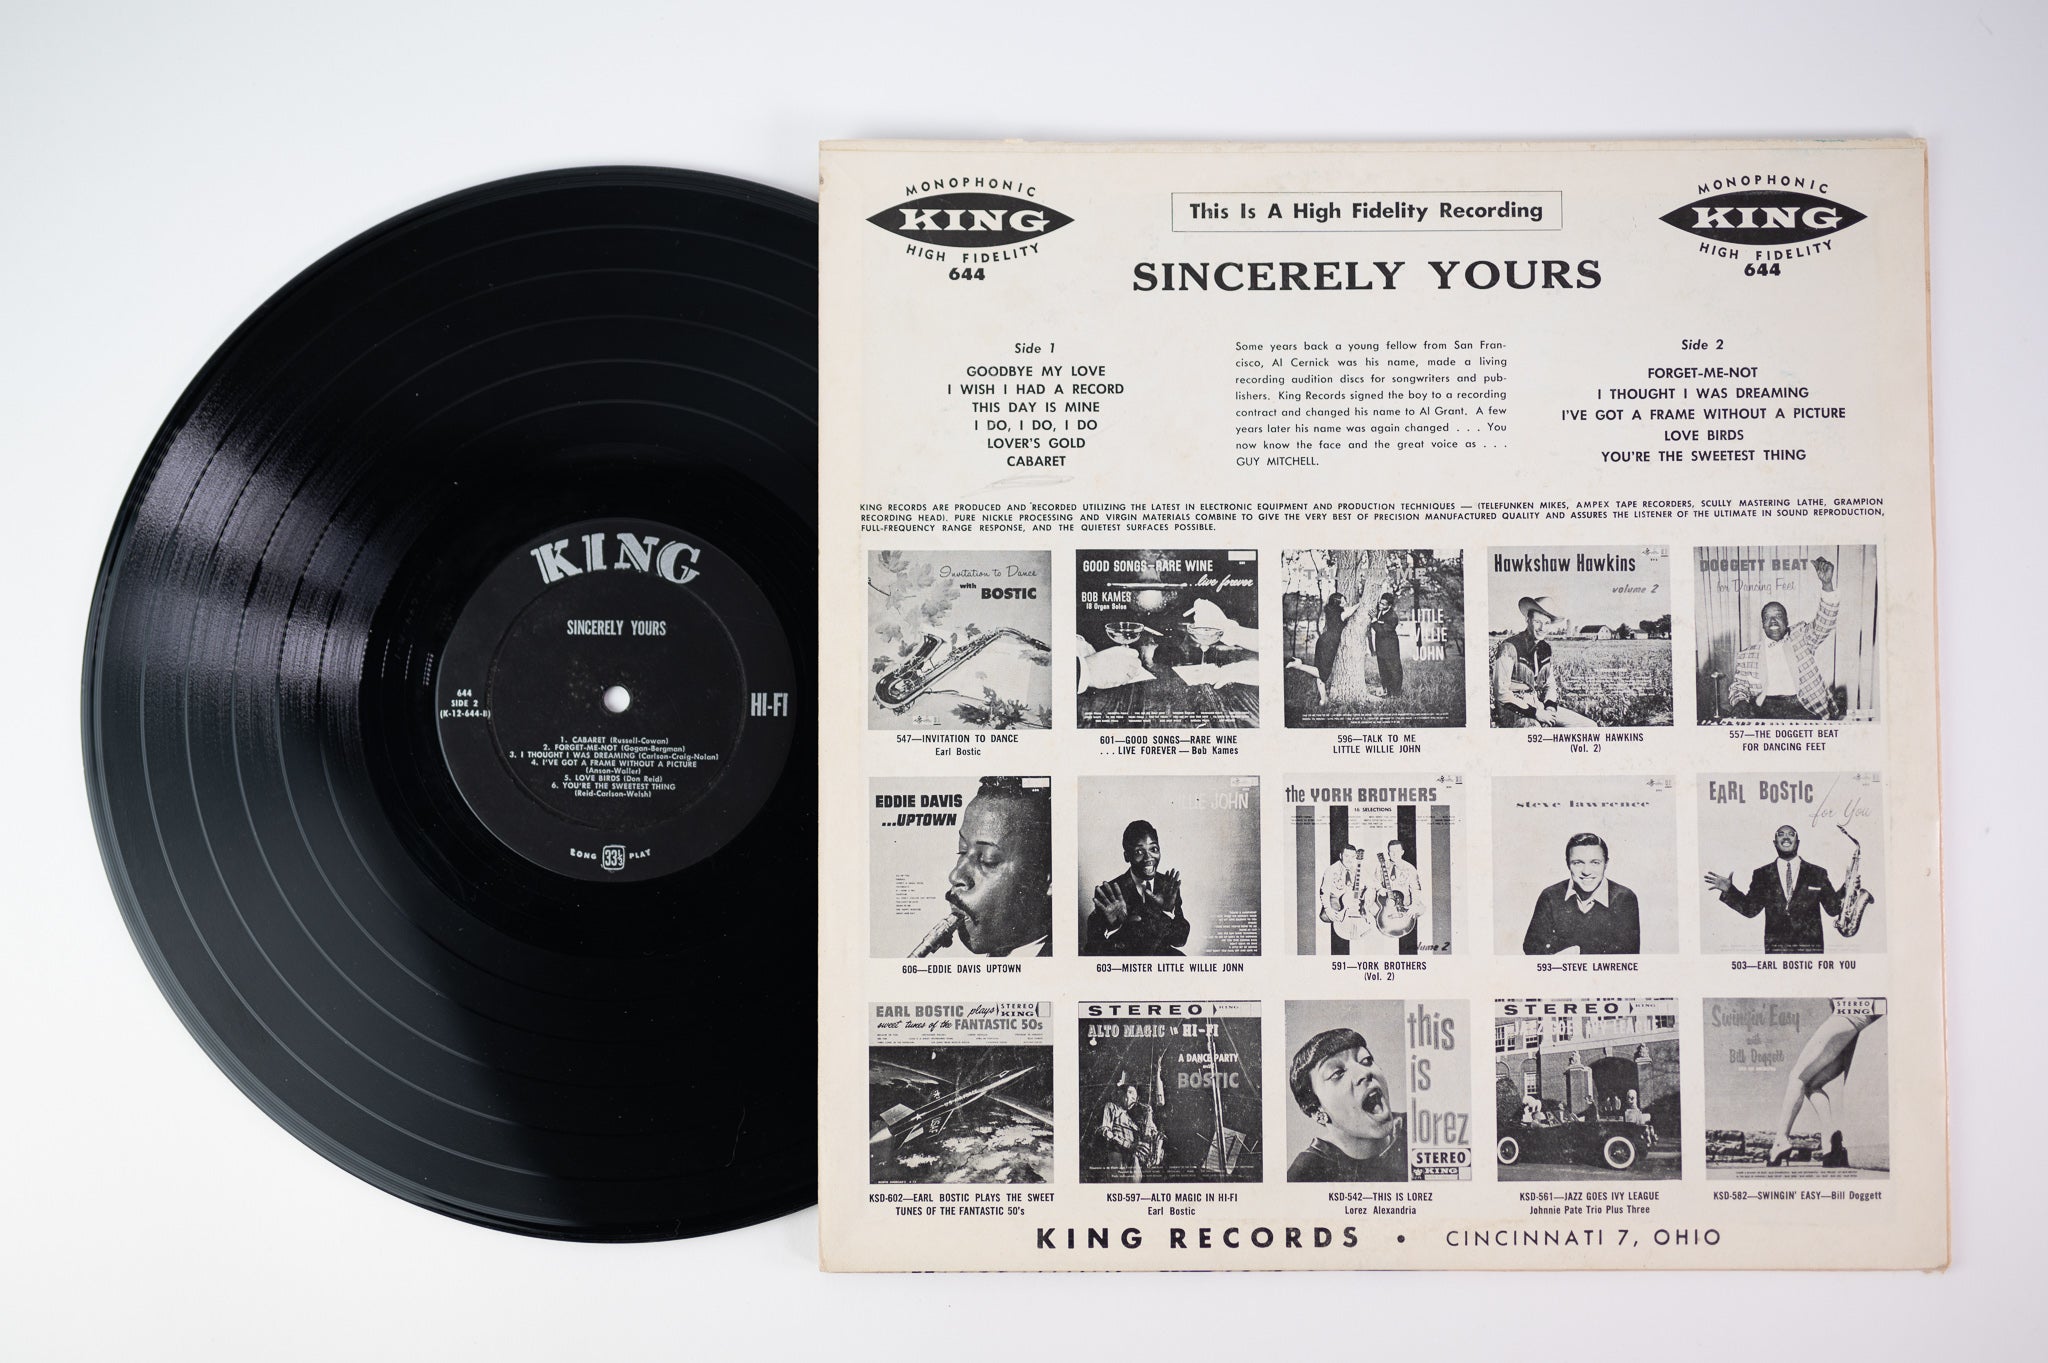 Guy Mitchell - Sincerely Yours on King